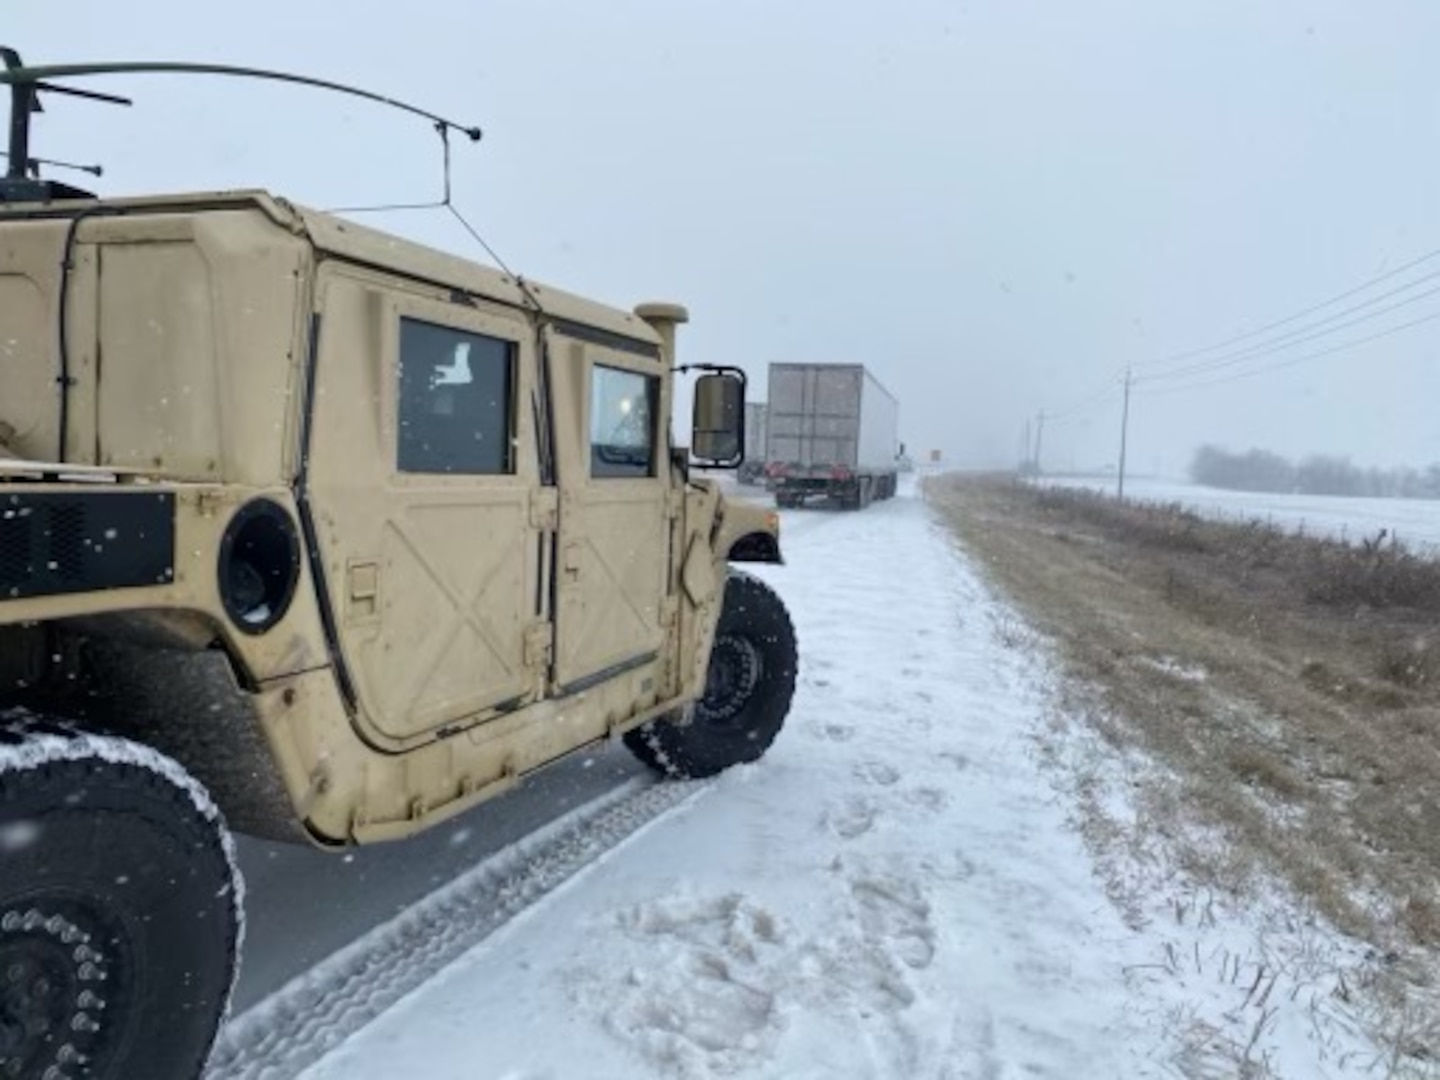 Indiana Guardsmen from the 38th Combat Aviation Brigade pull their Humvee over in order to assist a semitrailer that slid off the road due to severe winter weather conditions, Thursday, Feb. 3, 2022. A total of 60 highway teams assisted along Hoosier highways with 20 in the northern part of the state, 20 in the central and 14 in the south, with an additional six ready to move to areas of the state with extreme weather impacts.